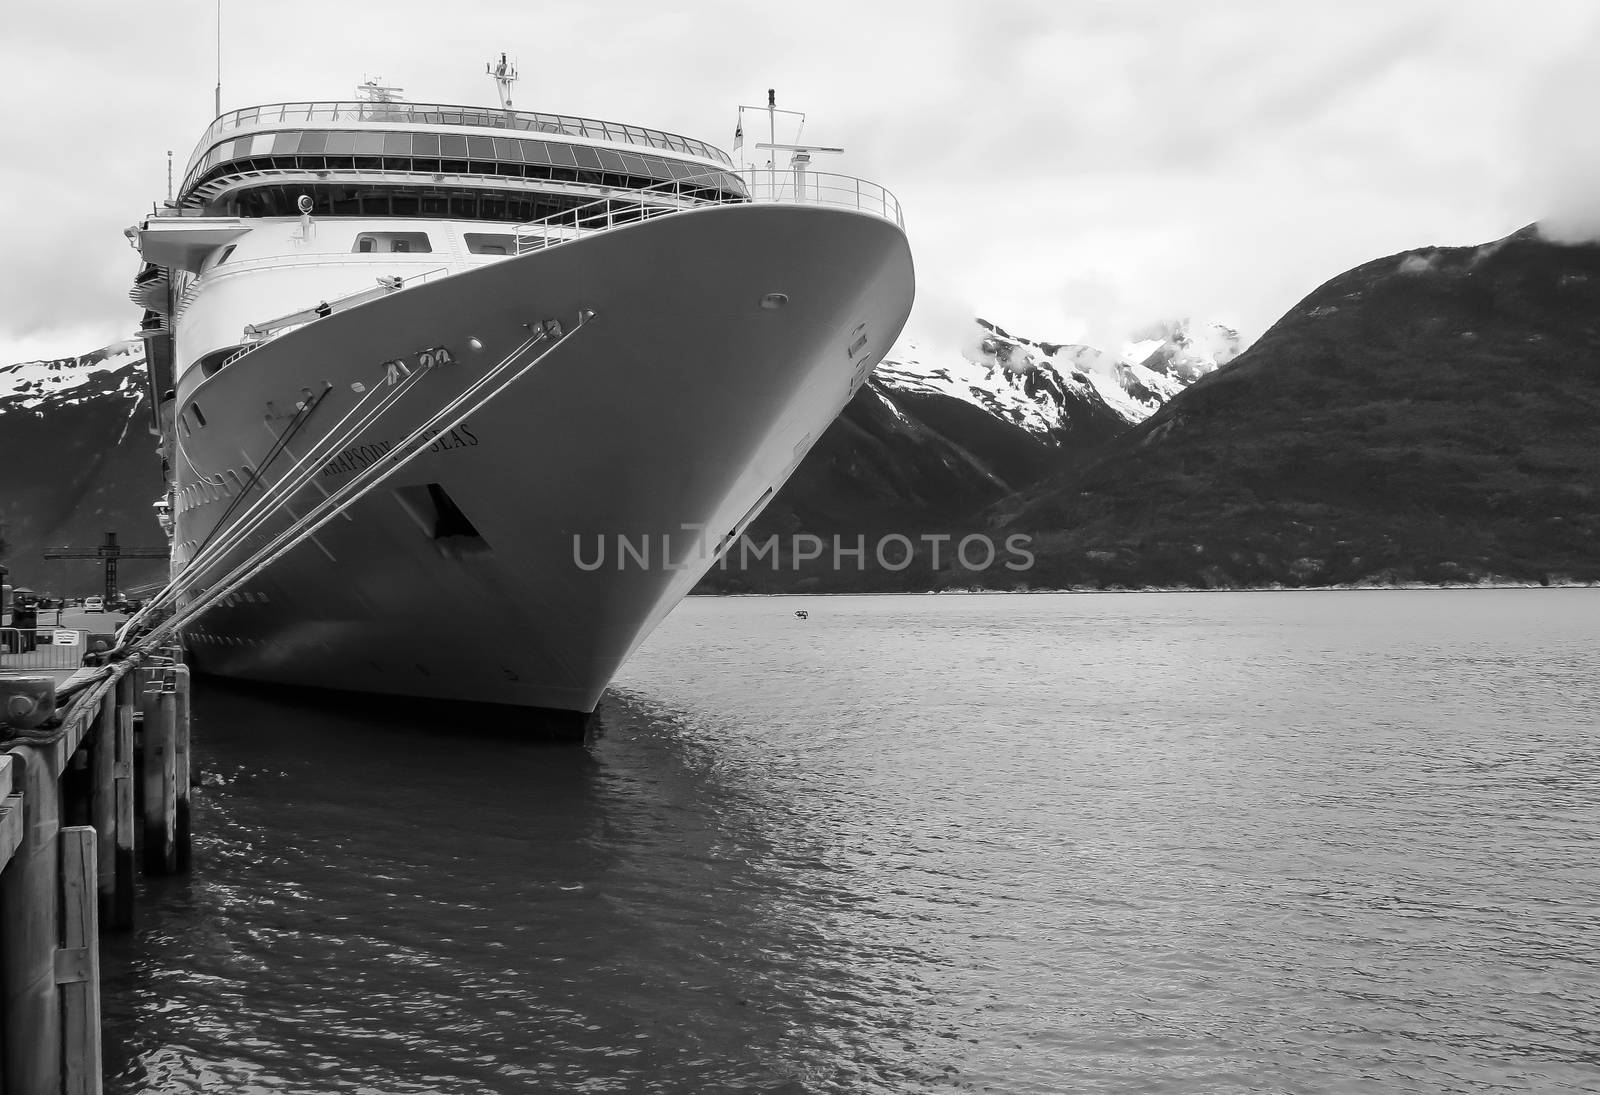 Skagway, Alaska, USA-June 18, 2012: A cruise ship is docked at the pier and waits to reload supplies and passengers at this popular cruise ship destination